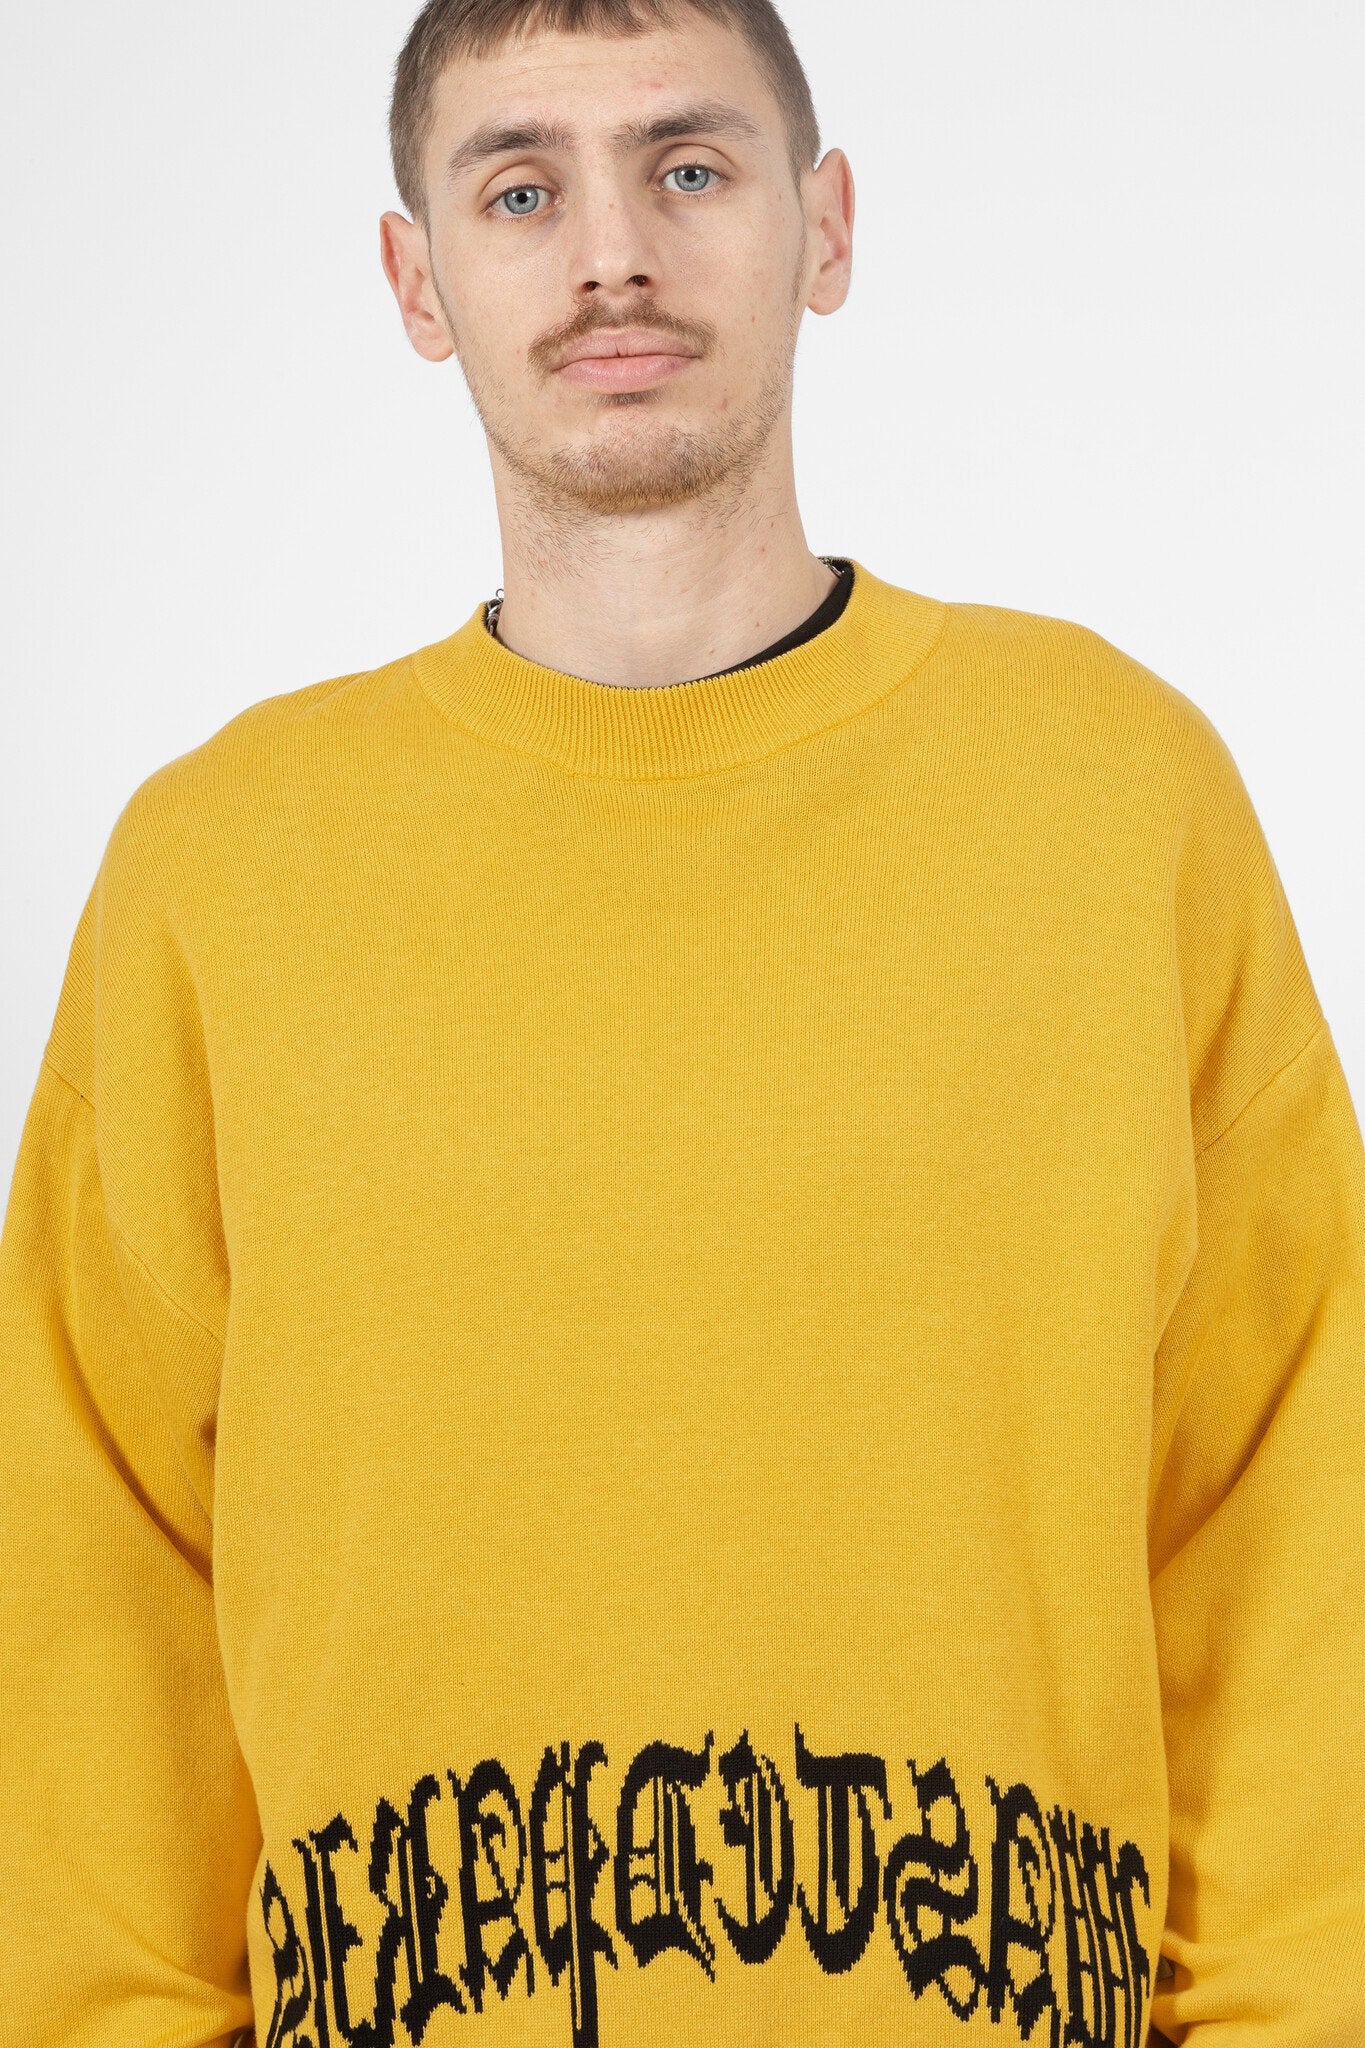 WASTED PARIS - REVERSE KINGDOM SWEATER - BLACK/GOLDEN YELLOW